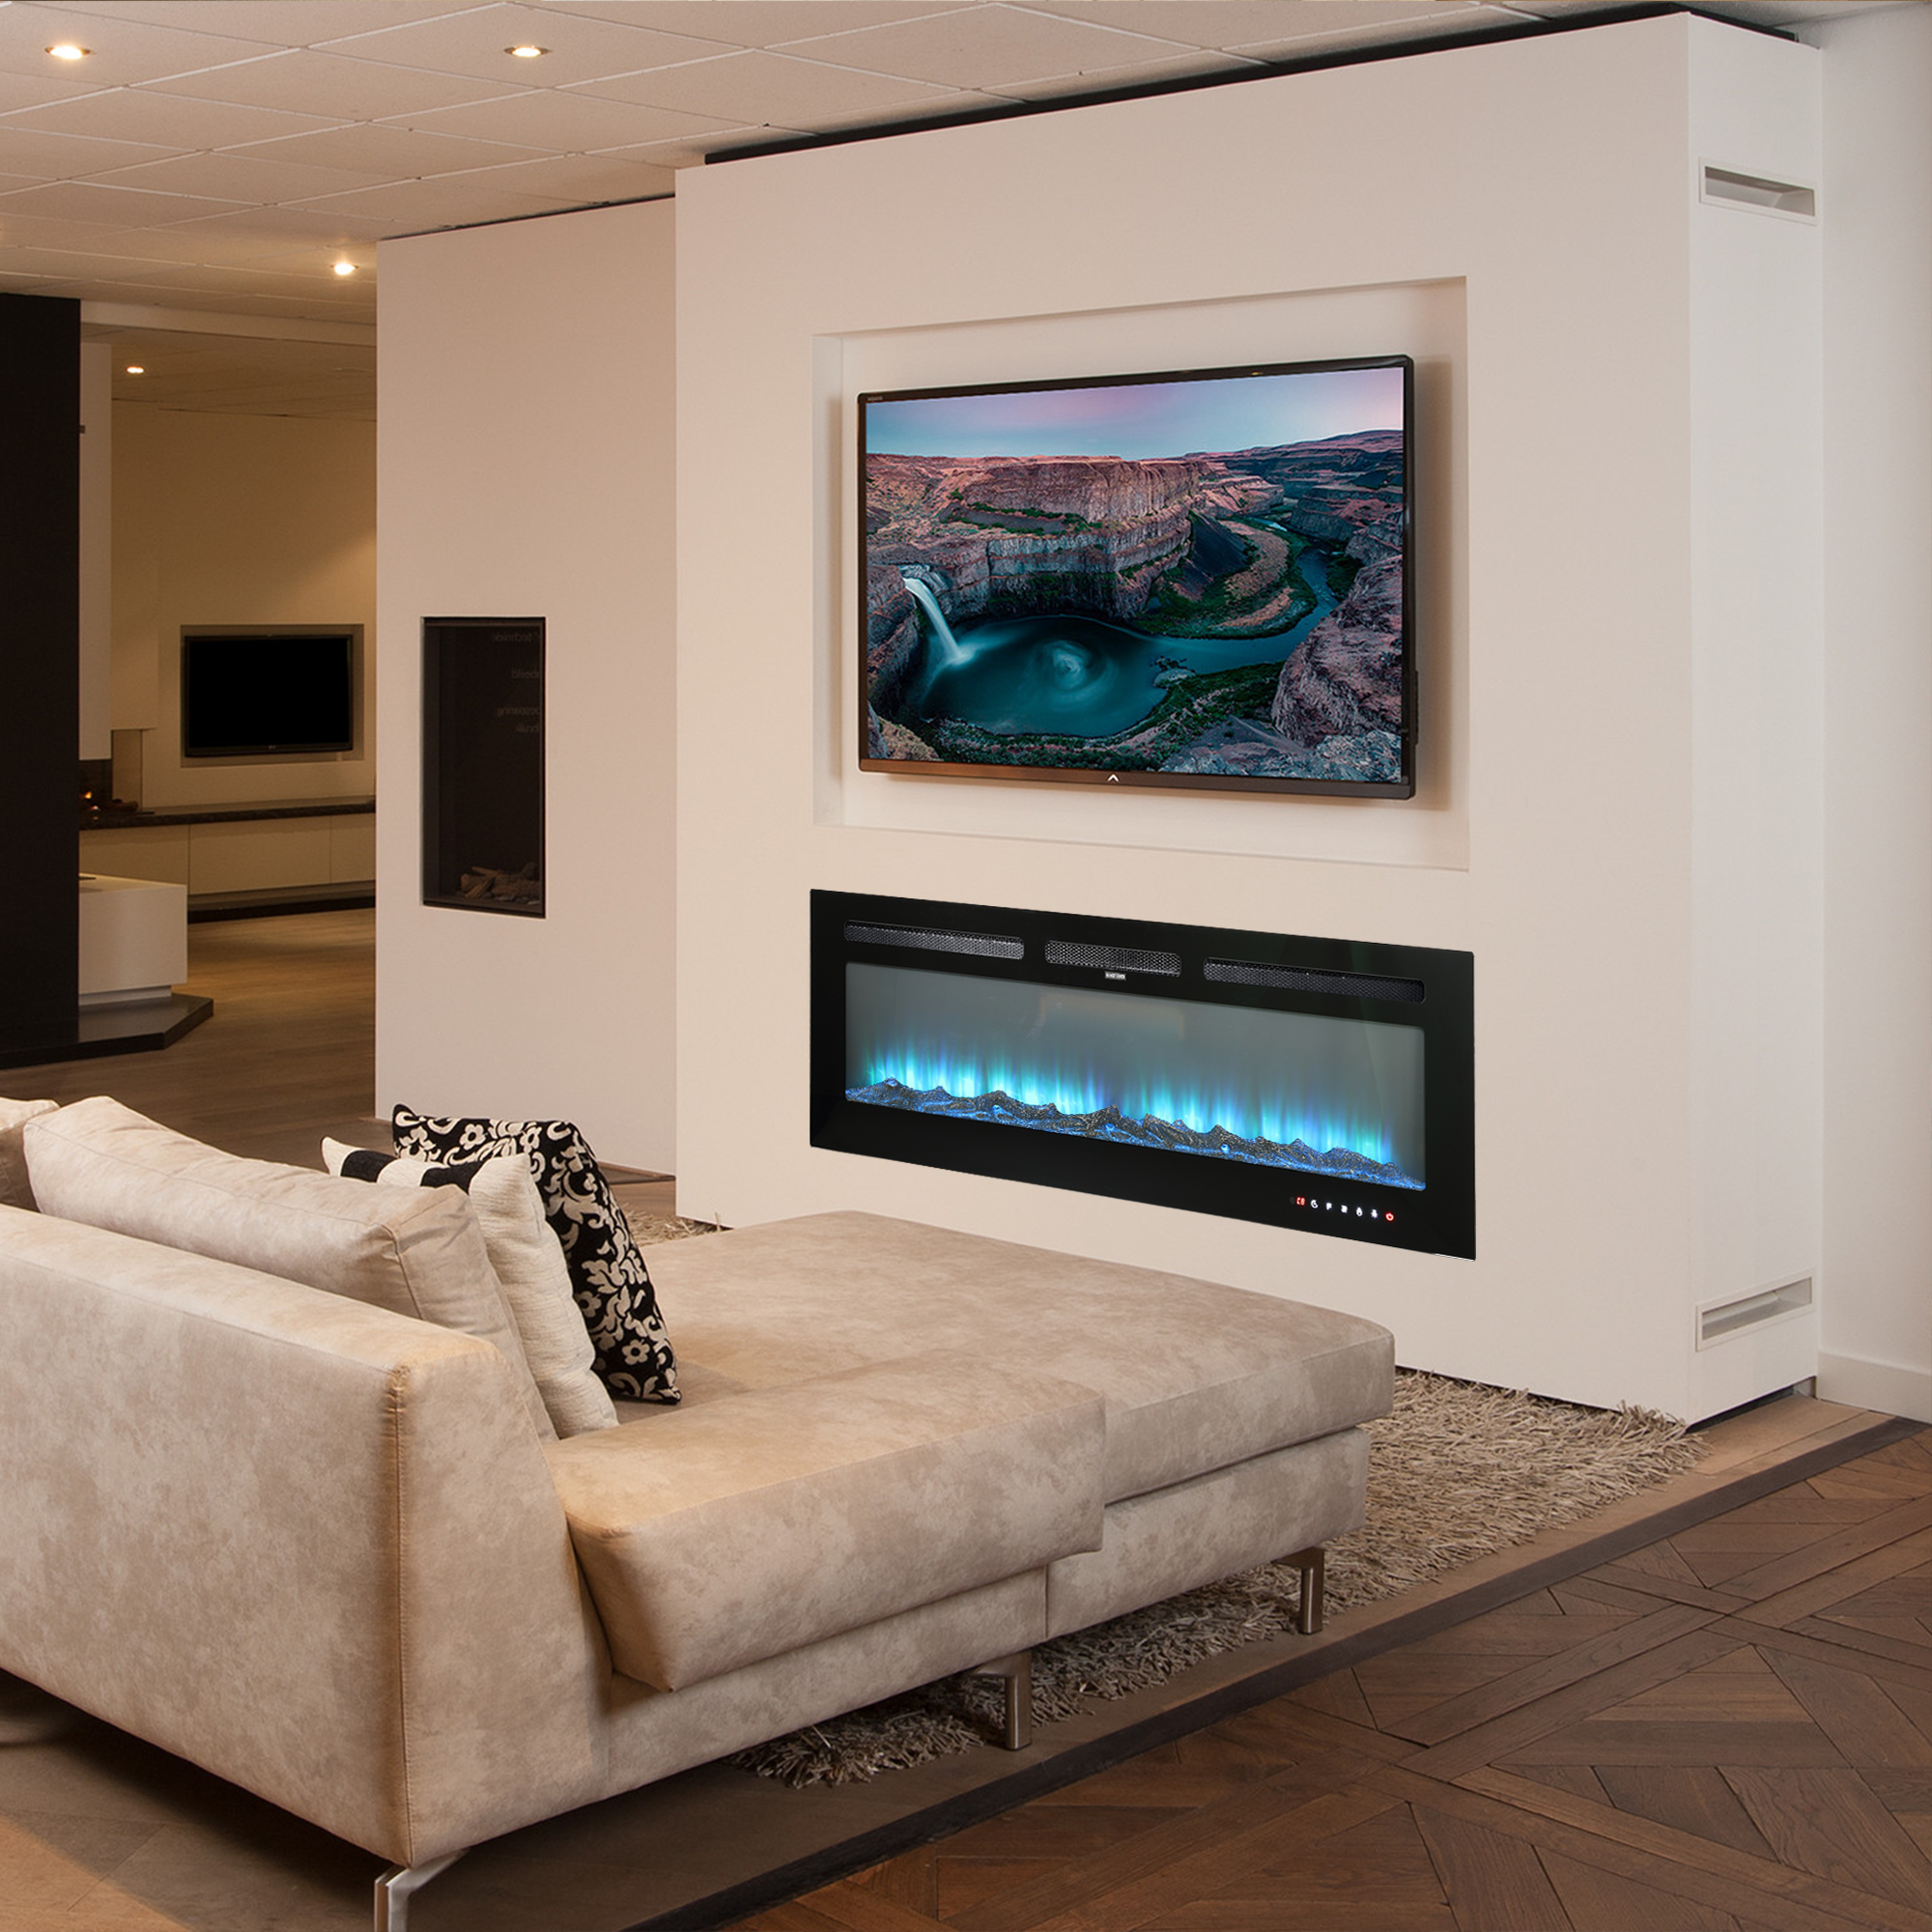 Basics Wall-Mounted Recessed Electric Fireplace